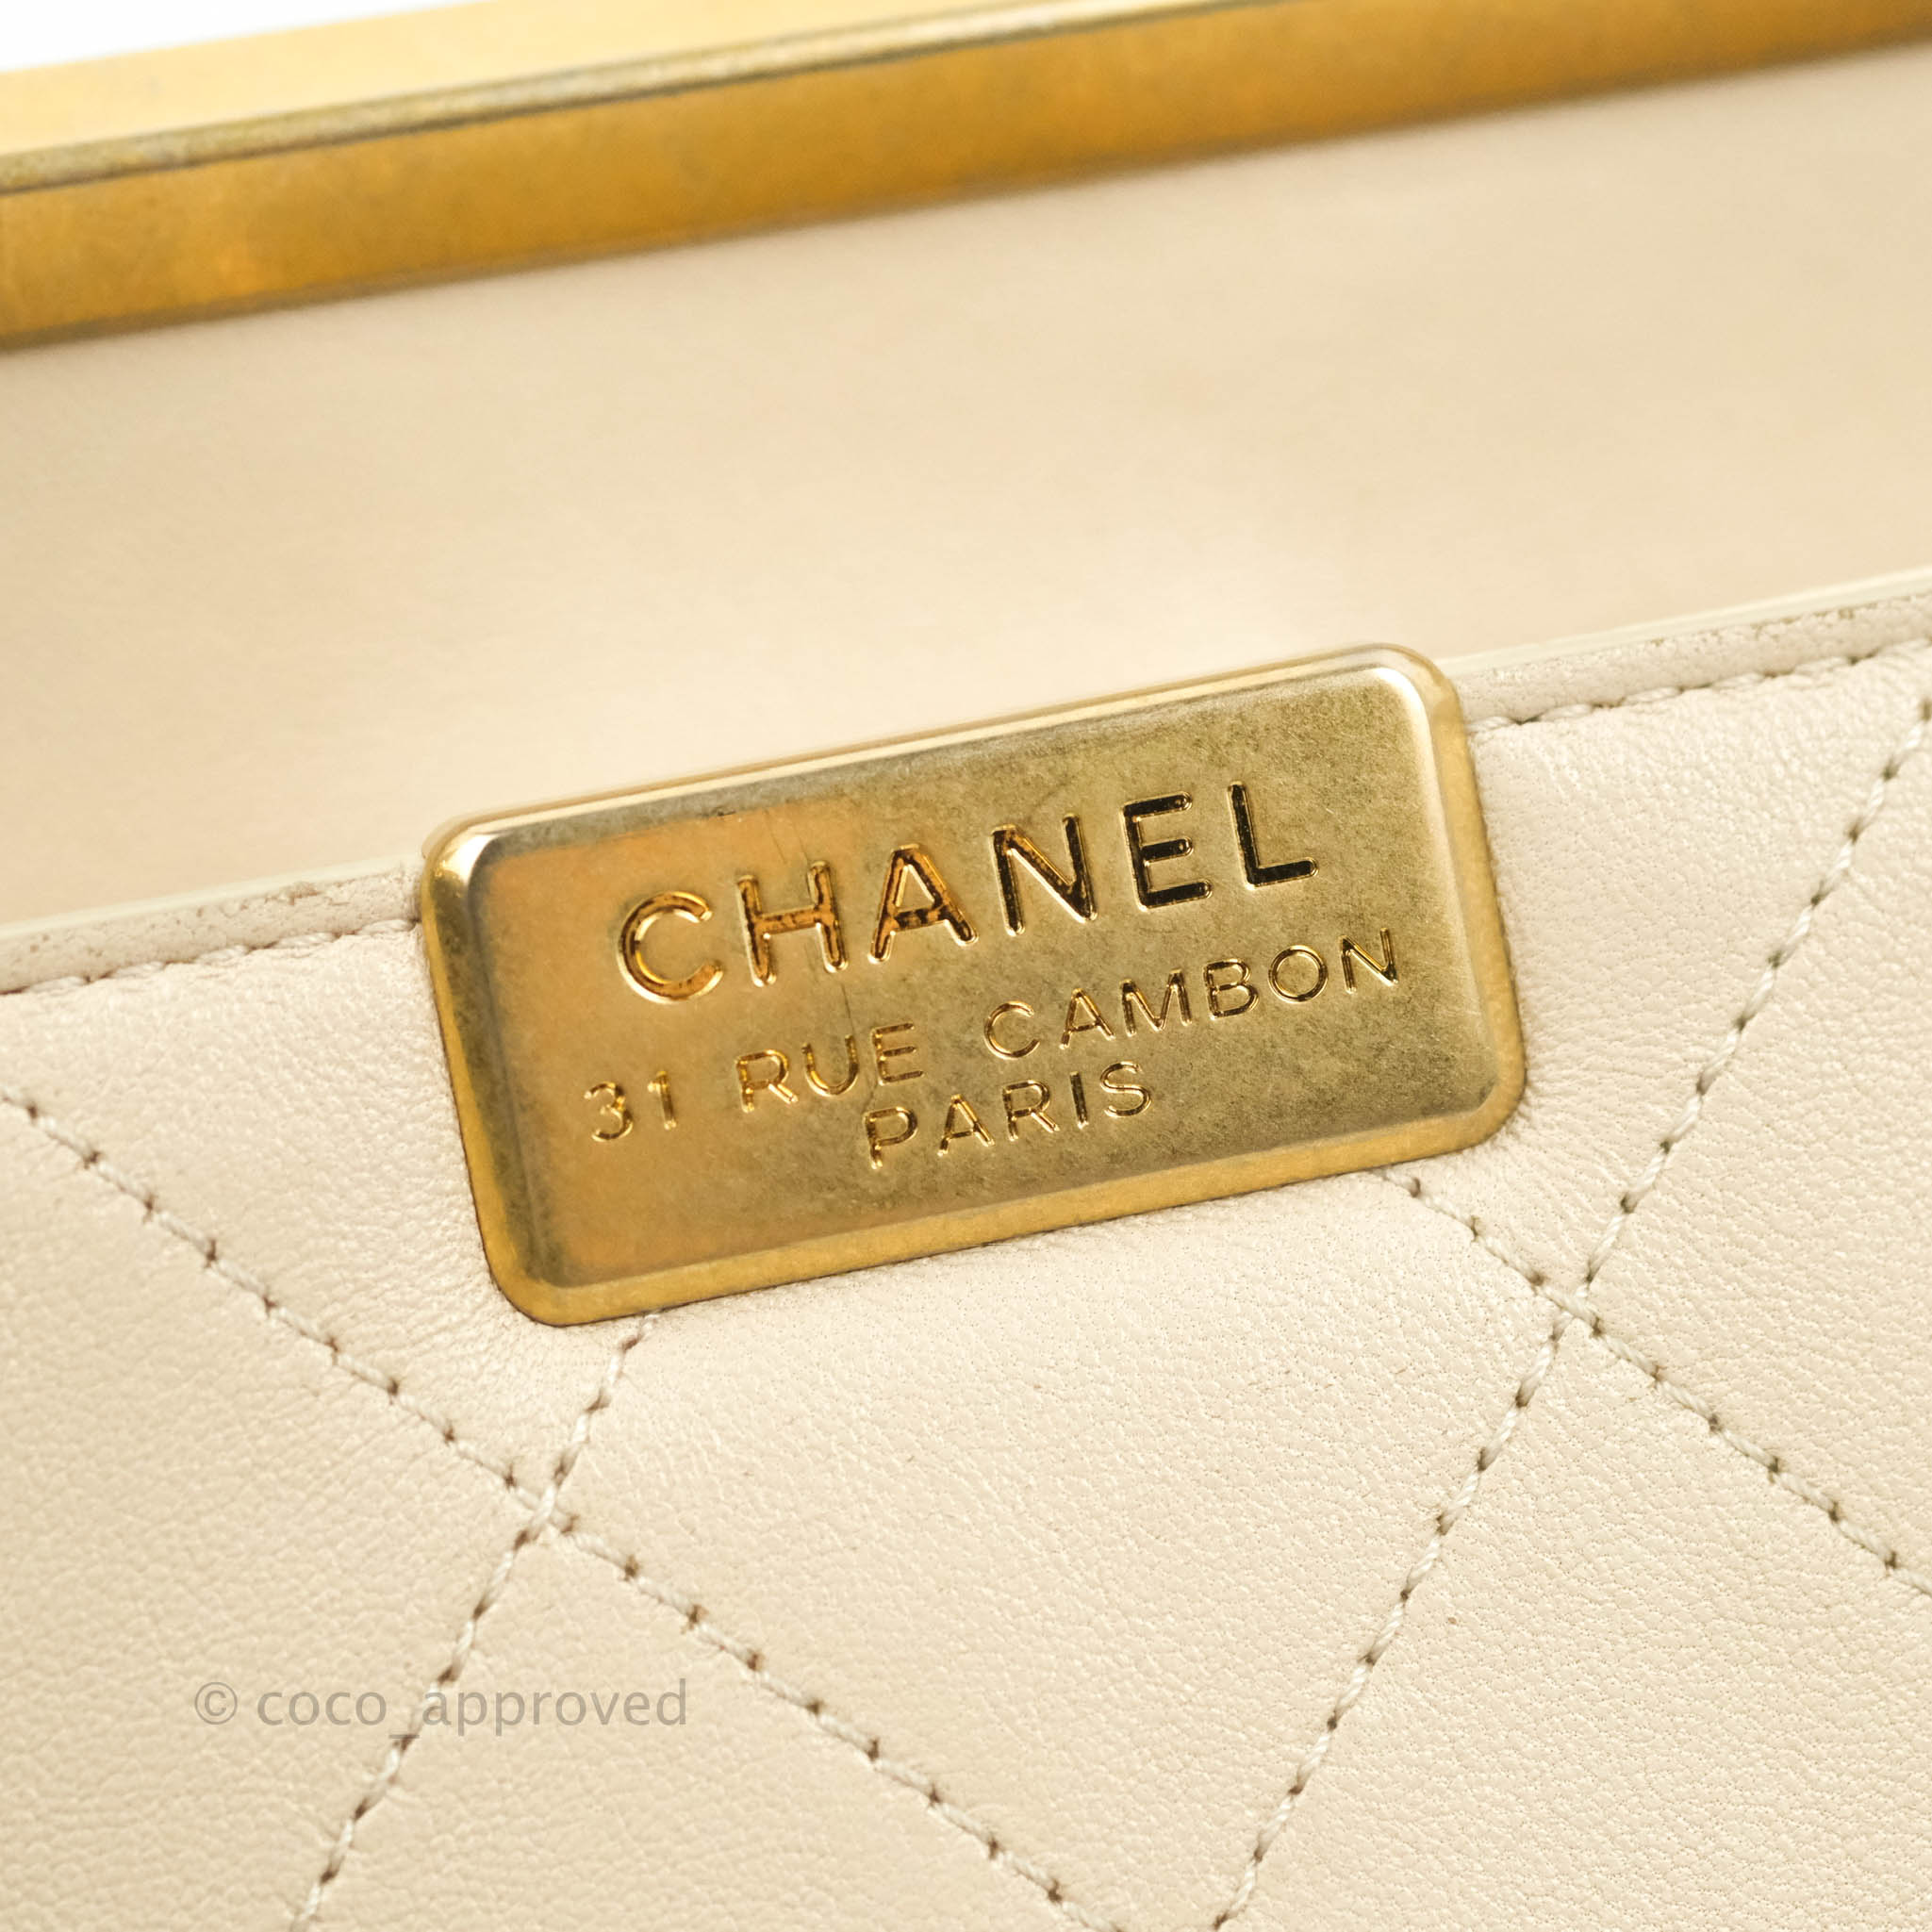 Chanel Small Flat Quilted Coco Luxe Flap Bag Light Beige Aged Gold Har – Coco  Approved Studio